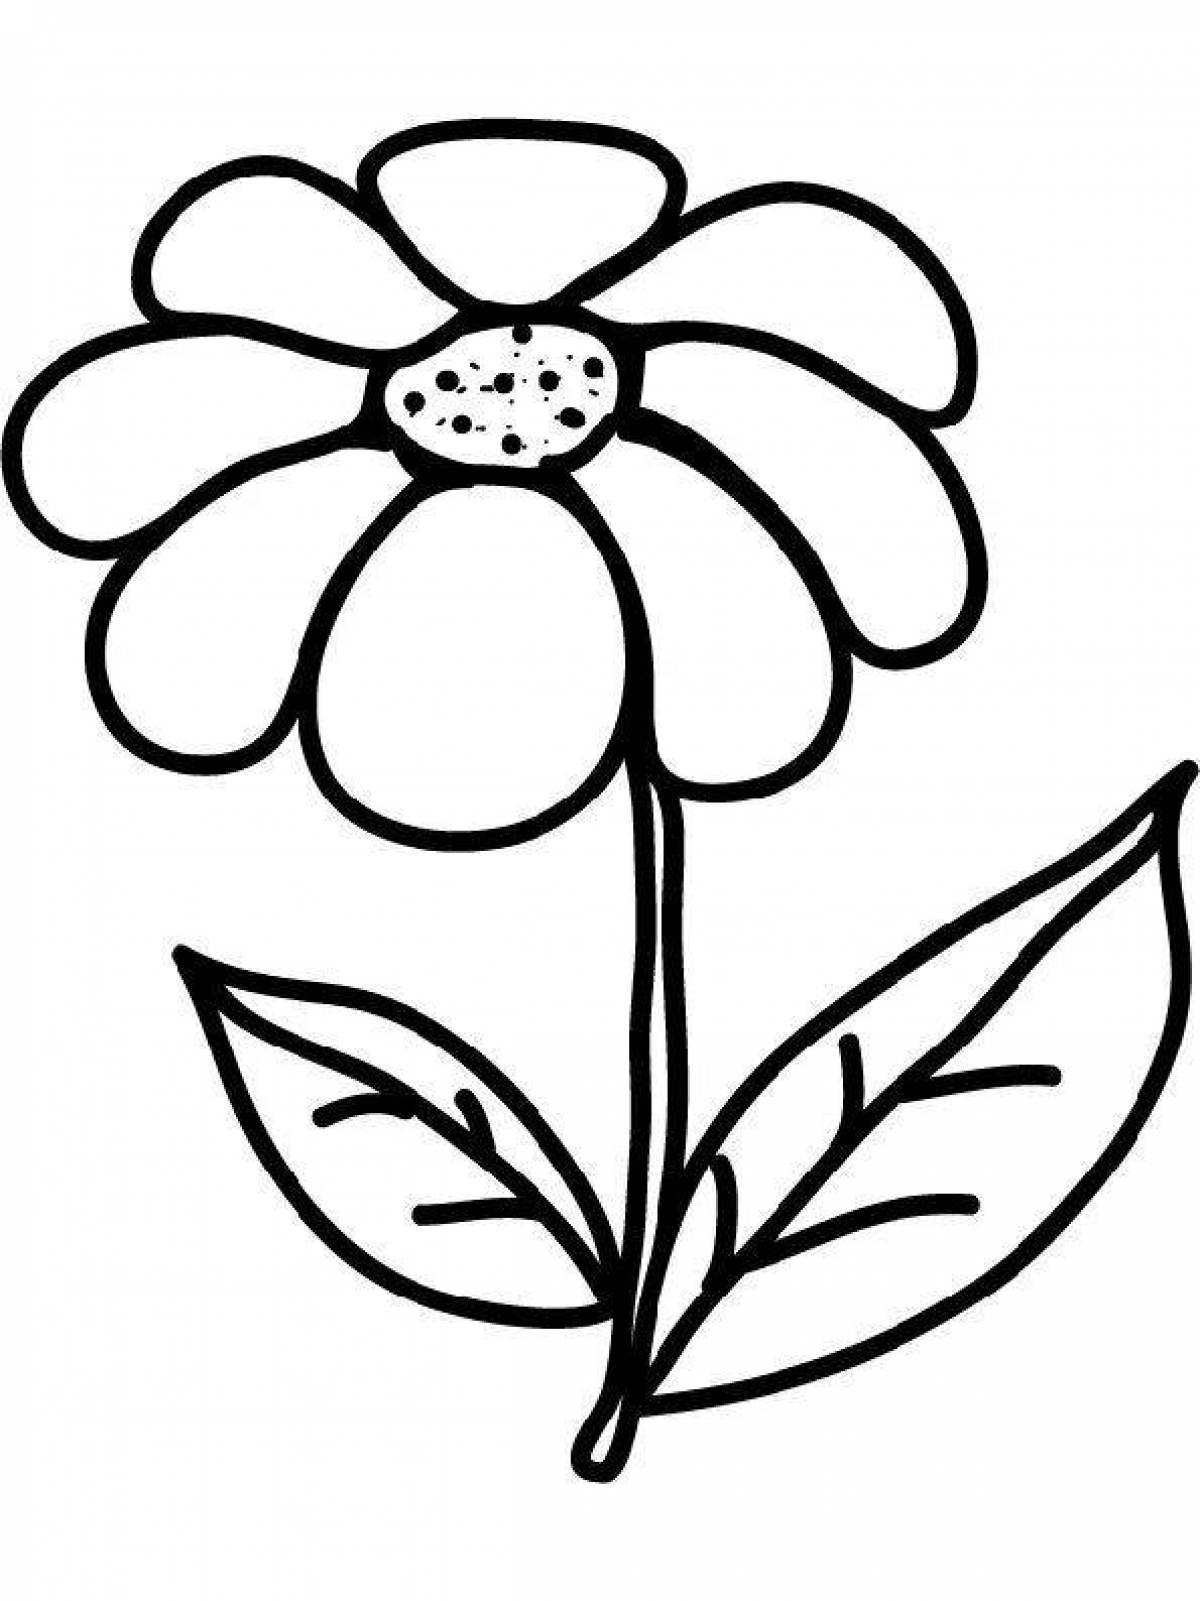 Cute plants coloring pages for kids